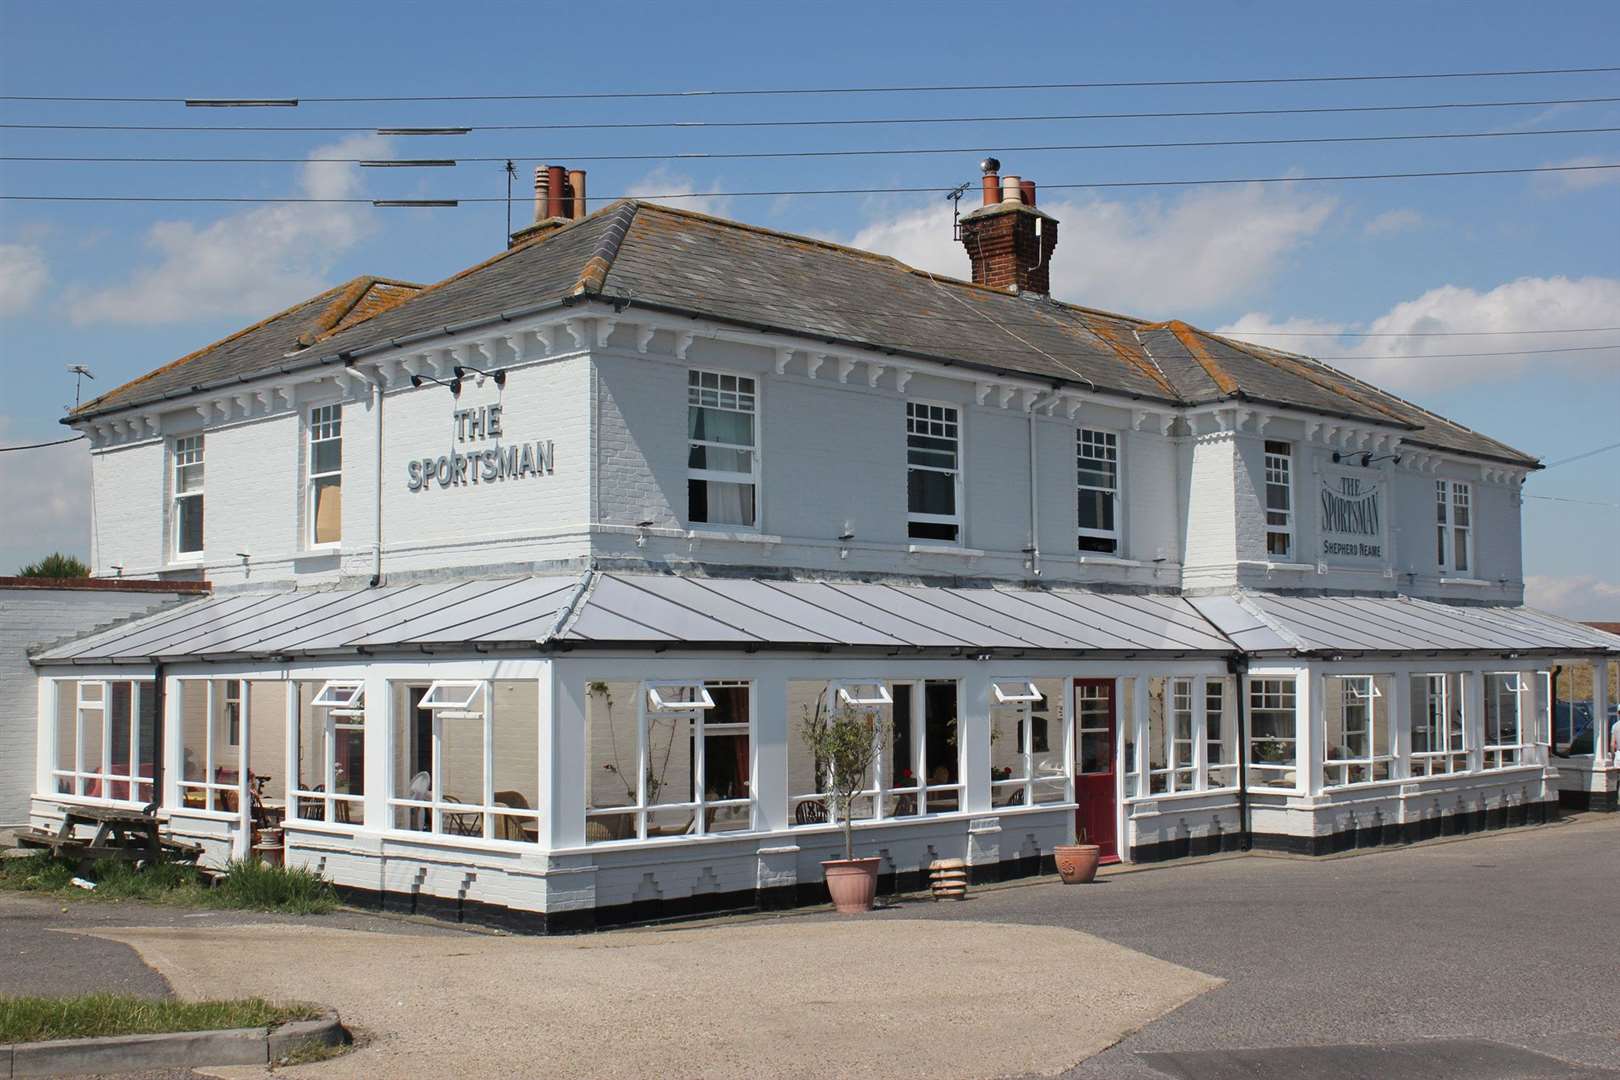 The Michelin-starred gastropub The Sportsman pub at Seasalter is popular among celebrities - including Gary Lineker who enjoyed lunch there in 2017